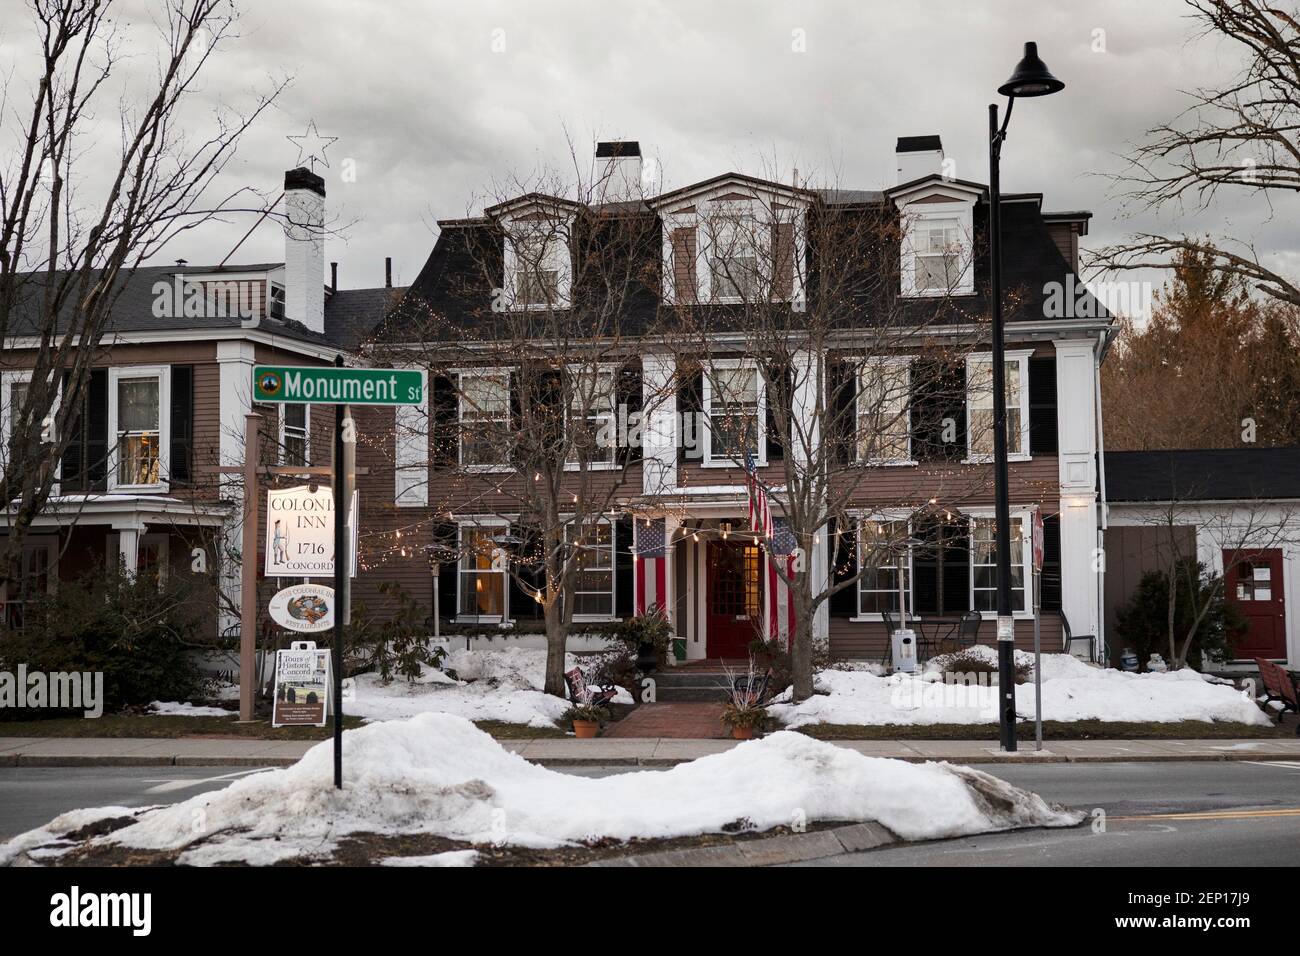 Concord's Colonial Inn on Monument Square in Concord, Massachusetts, USA, on a cloudy winter day. The historic hotel's building dates to 1716. Stock Photo